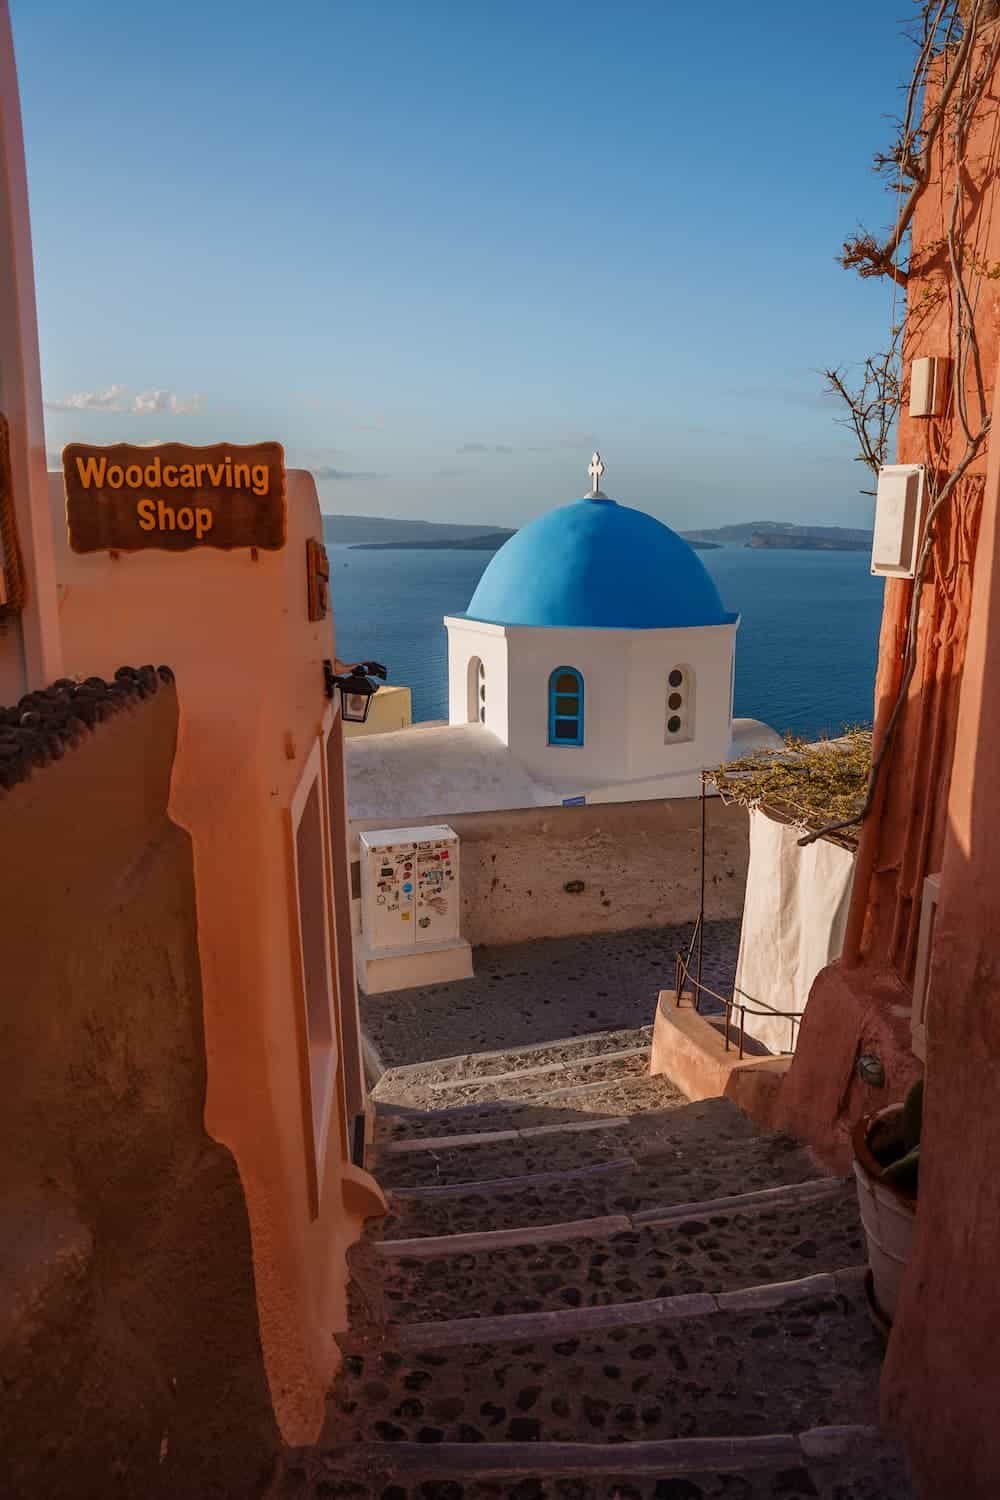 Explore the charming village of Oia in Santorini, Greece with our 3 Day Santorini Itinerary.